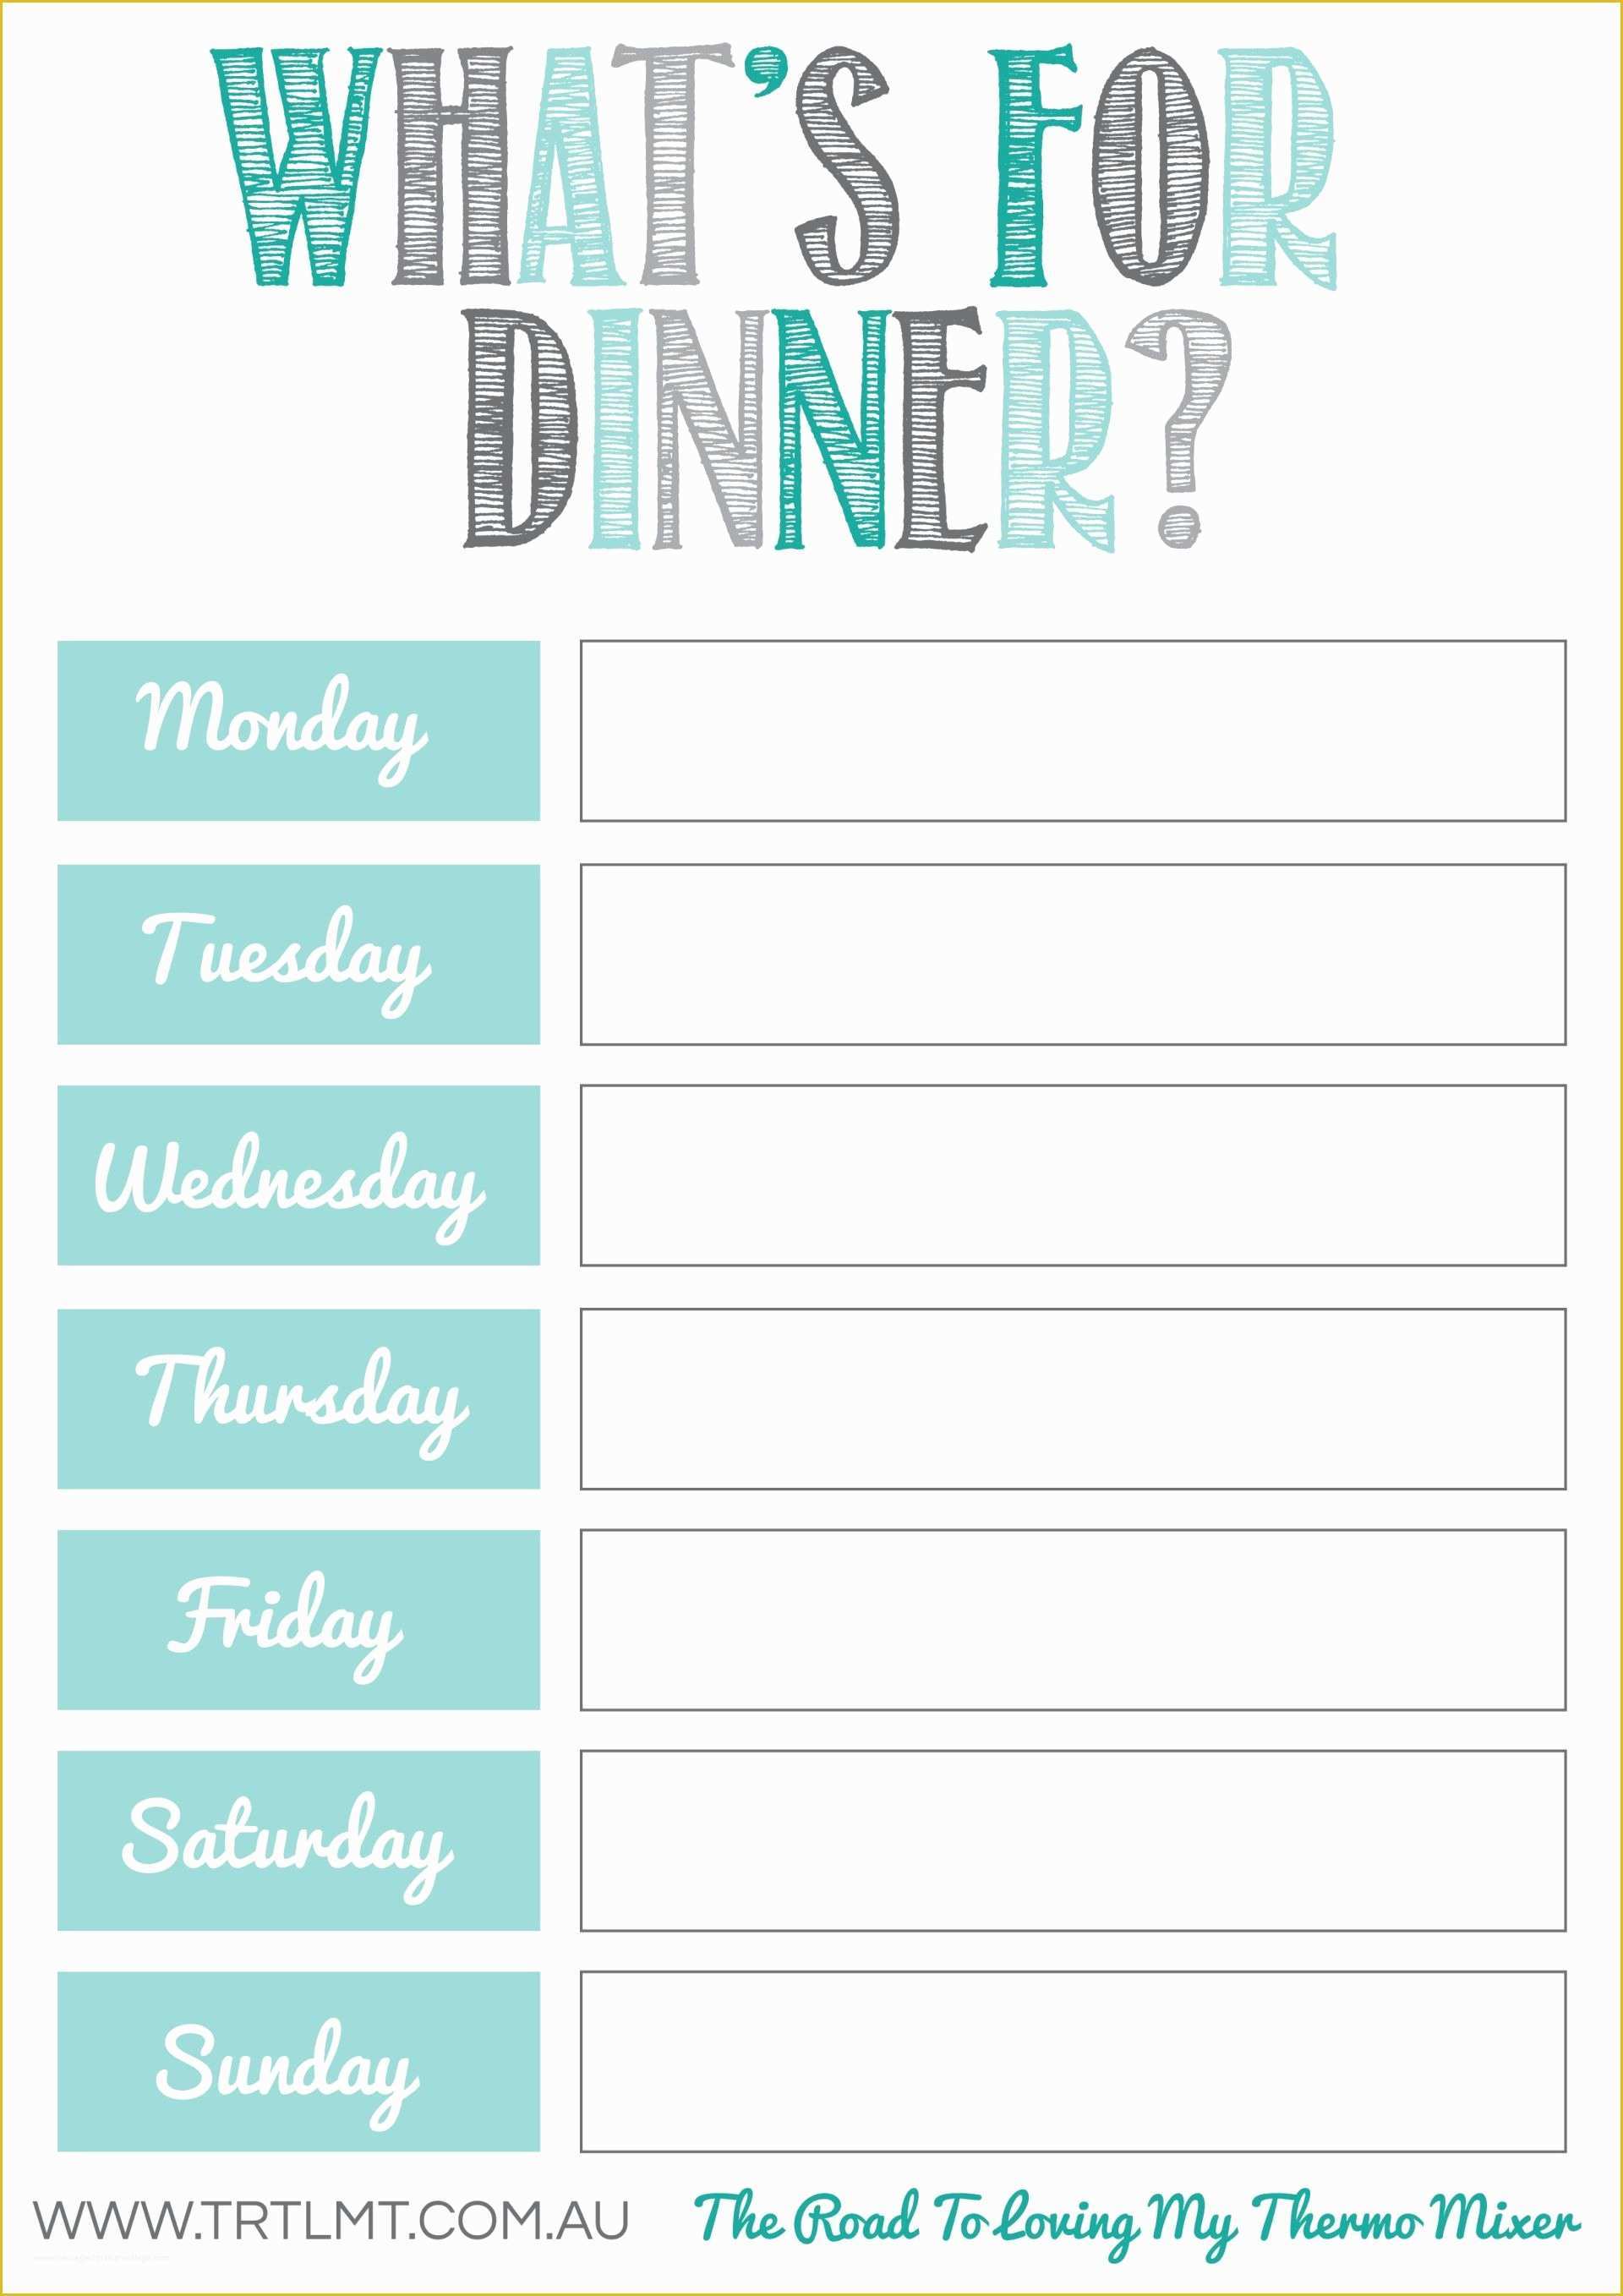 Free Printable Food Menu Templates Of What S for Dinner 2 Fb organization